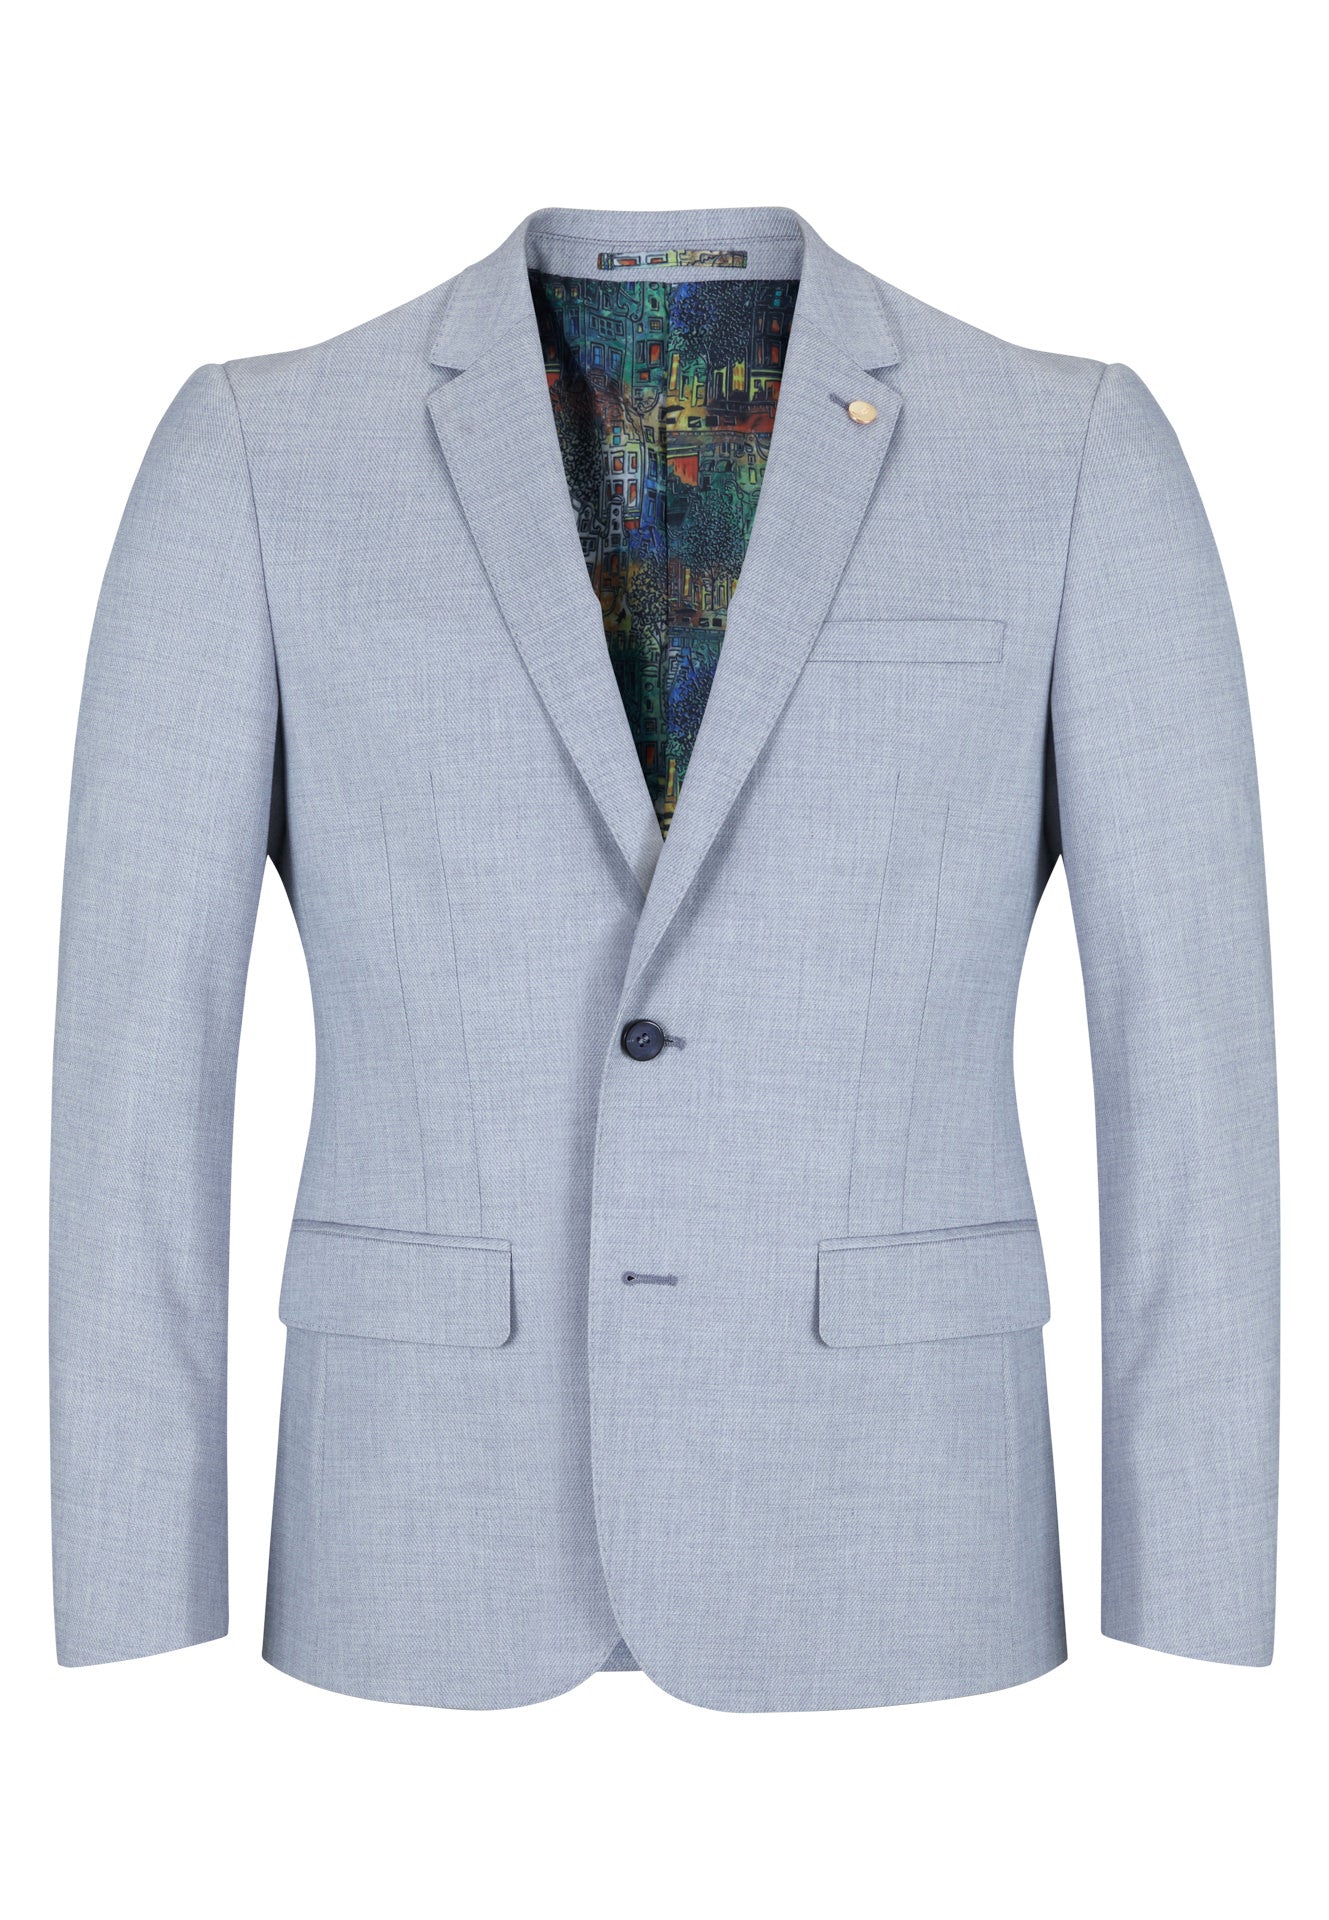 Men's Champ Sports Jacket - Grey-Front View